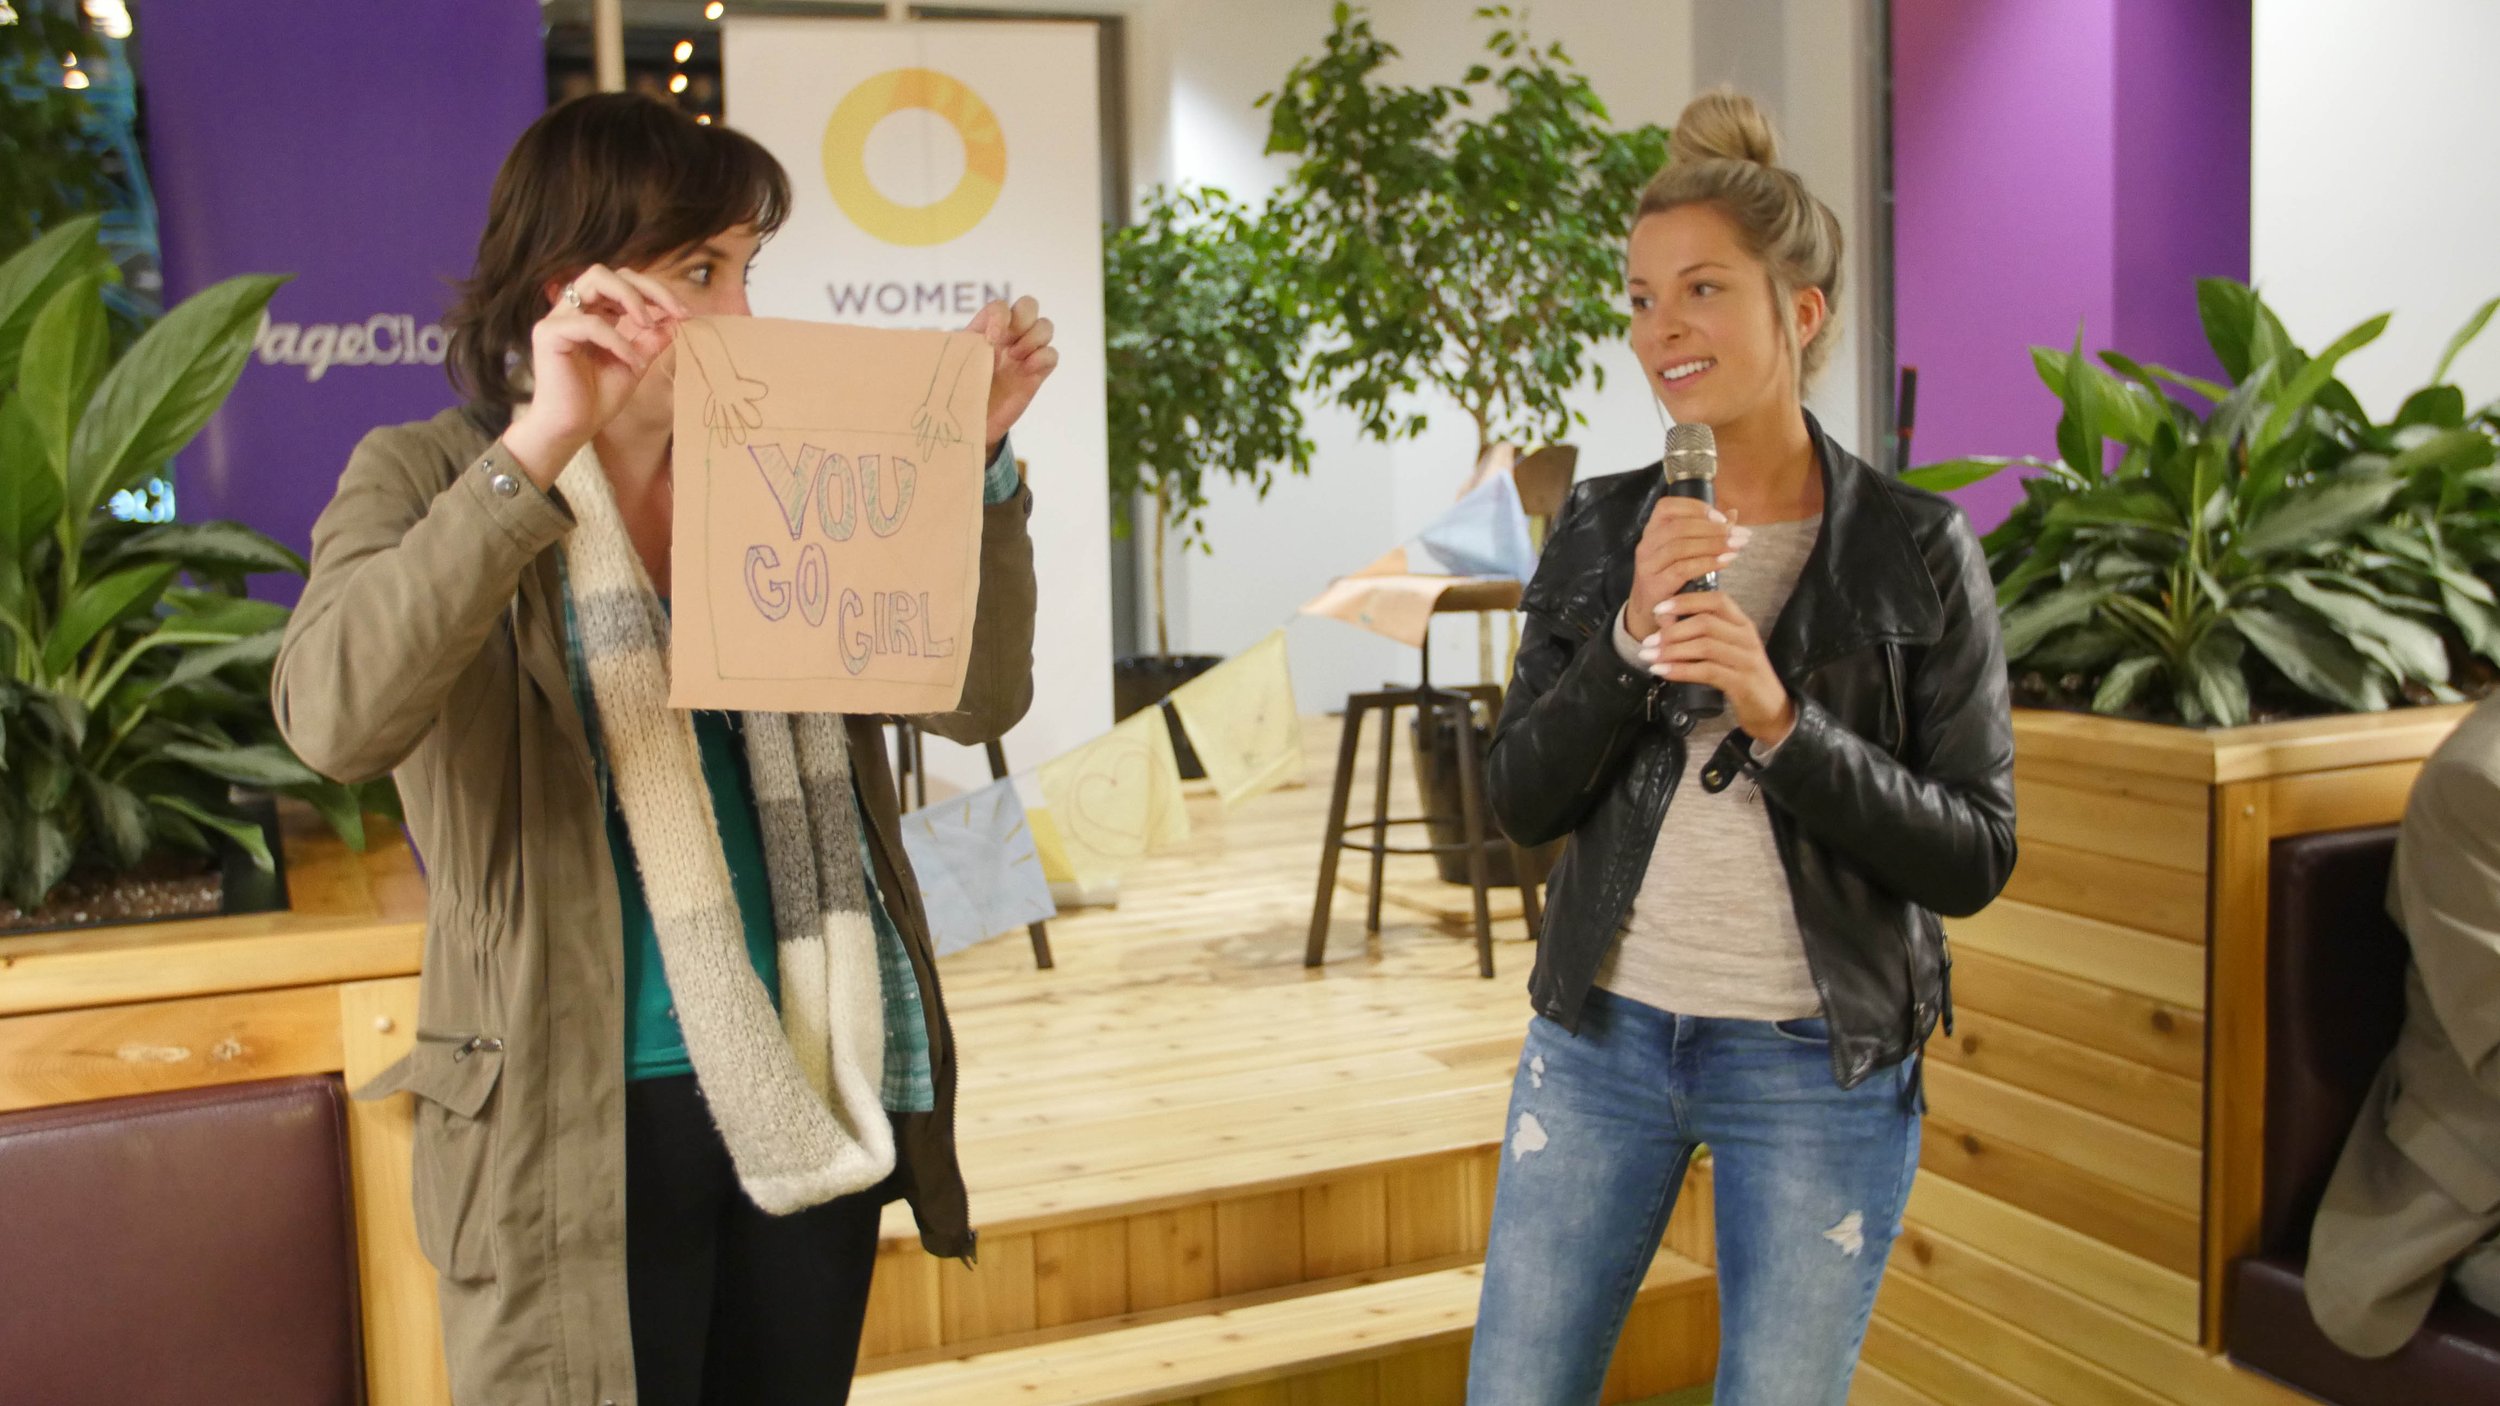  Two women are standing in front of the audience, one has a mic and the other is holding a piece of paper that says “You Go Girl.”  